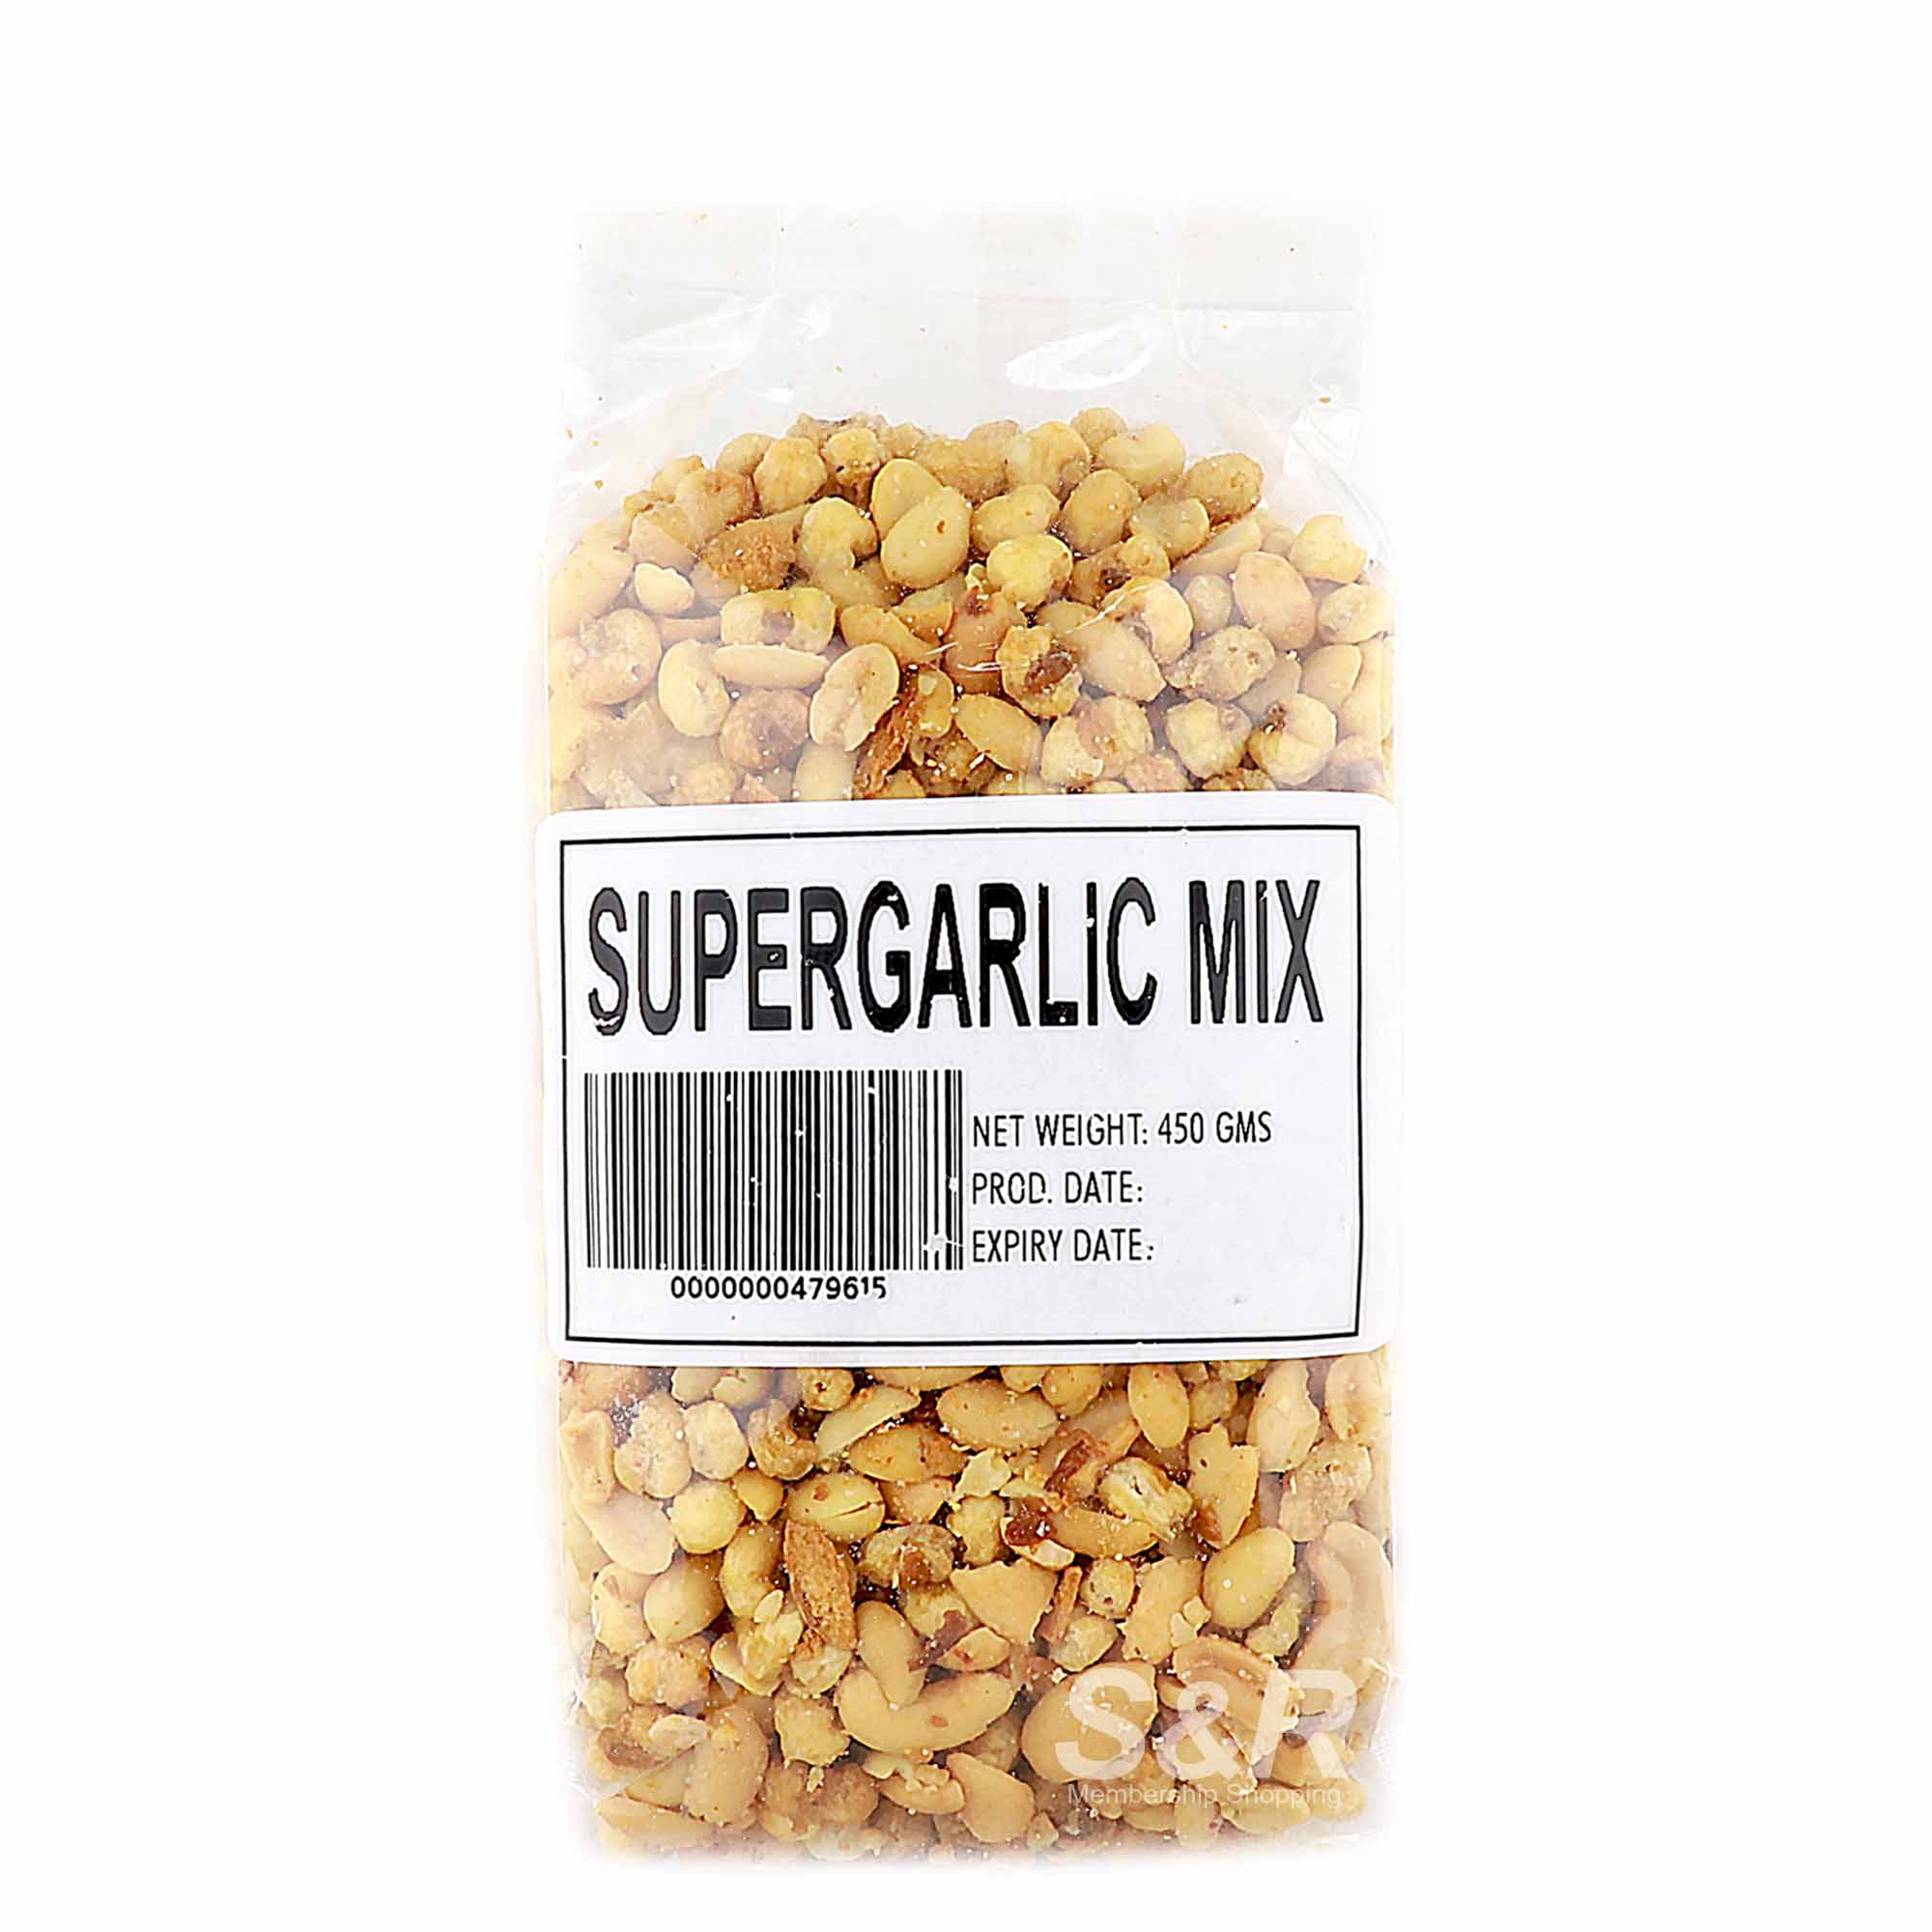 Supergarlic Mix Corn and Nuts 450g